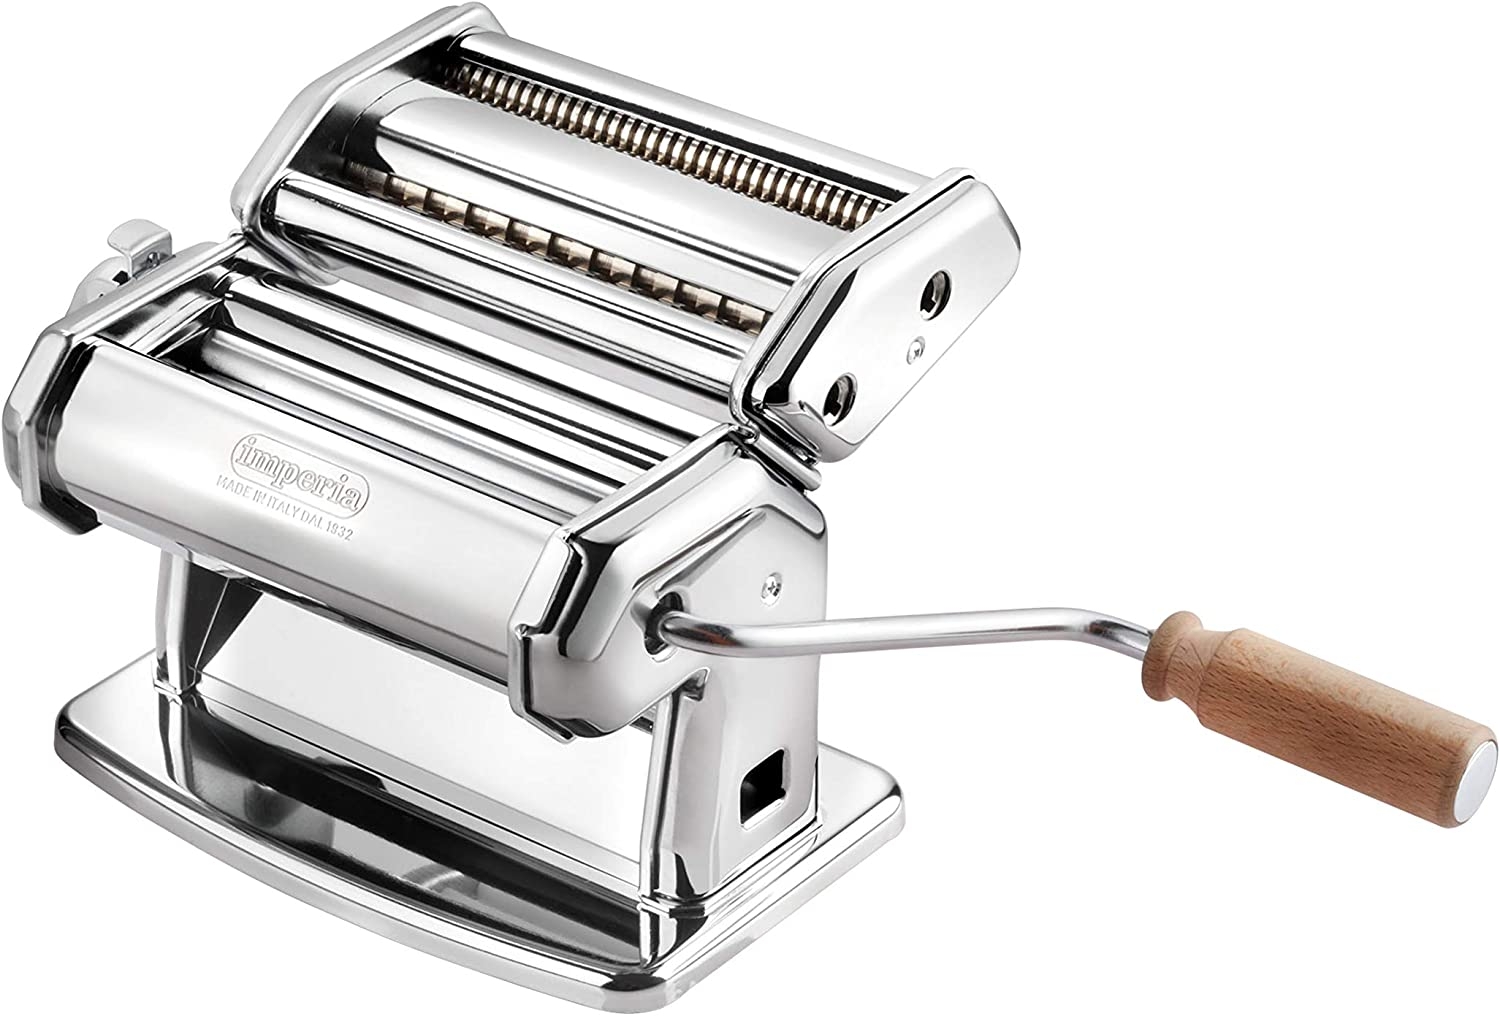 Imperia Pasta Maker Machine – Heavy Duty Steel Construction w Easy Lock Dial and Wood Grip Handle- Model 150 Made in Italy